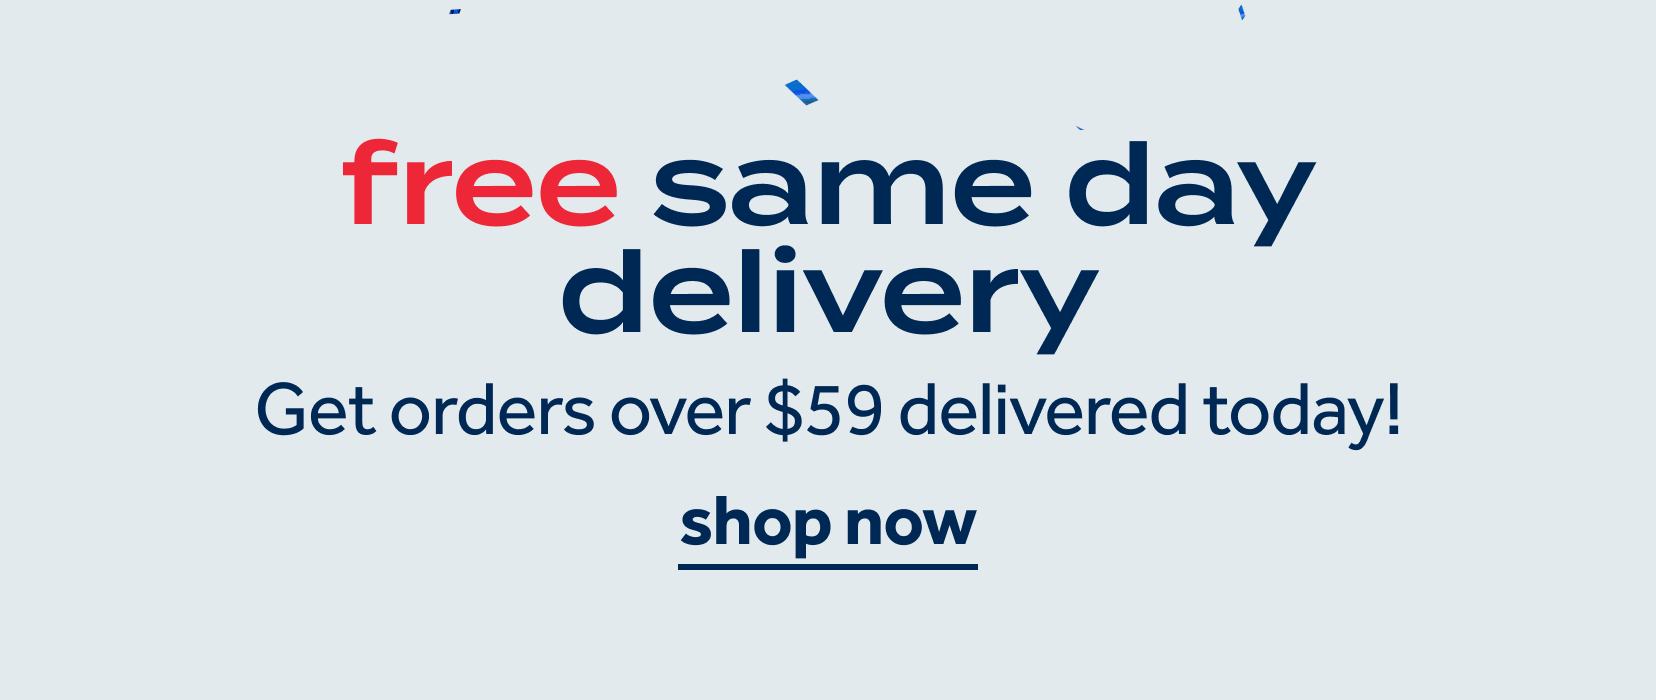 free same day delivery | Get orders over $59 delivered today! | shop now